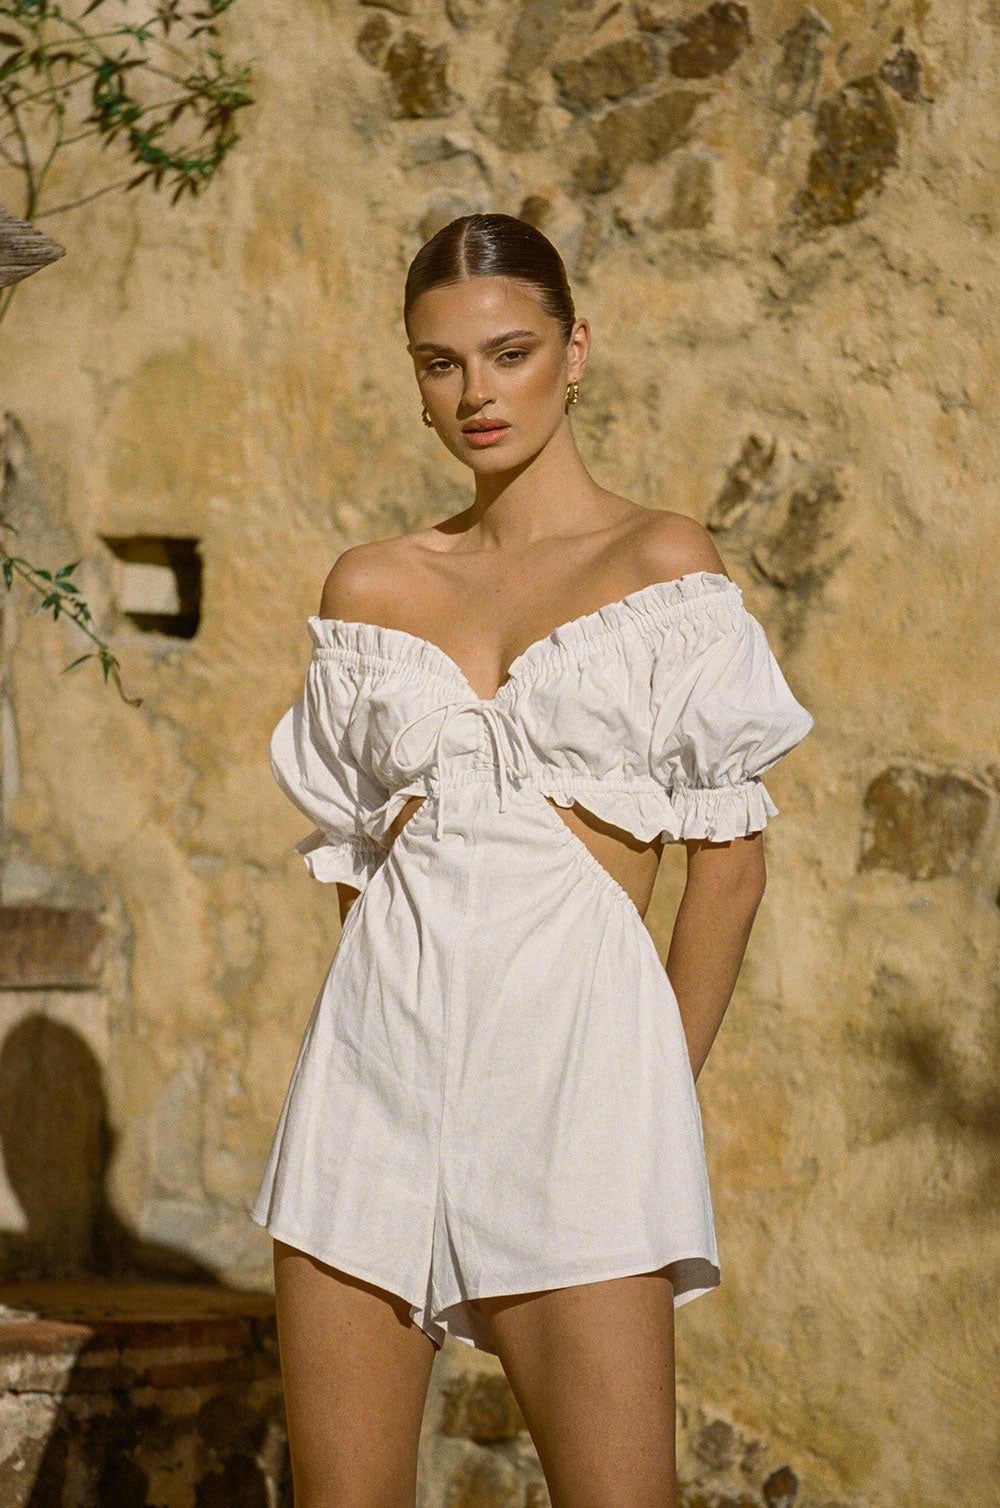 White playsuit designs to look hot and
trendy